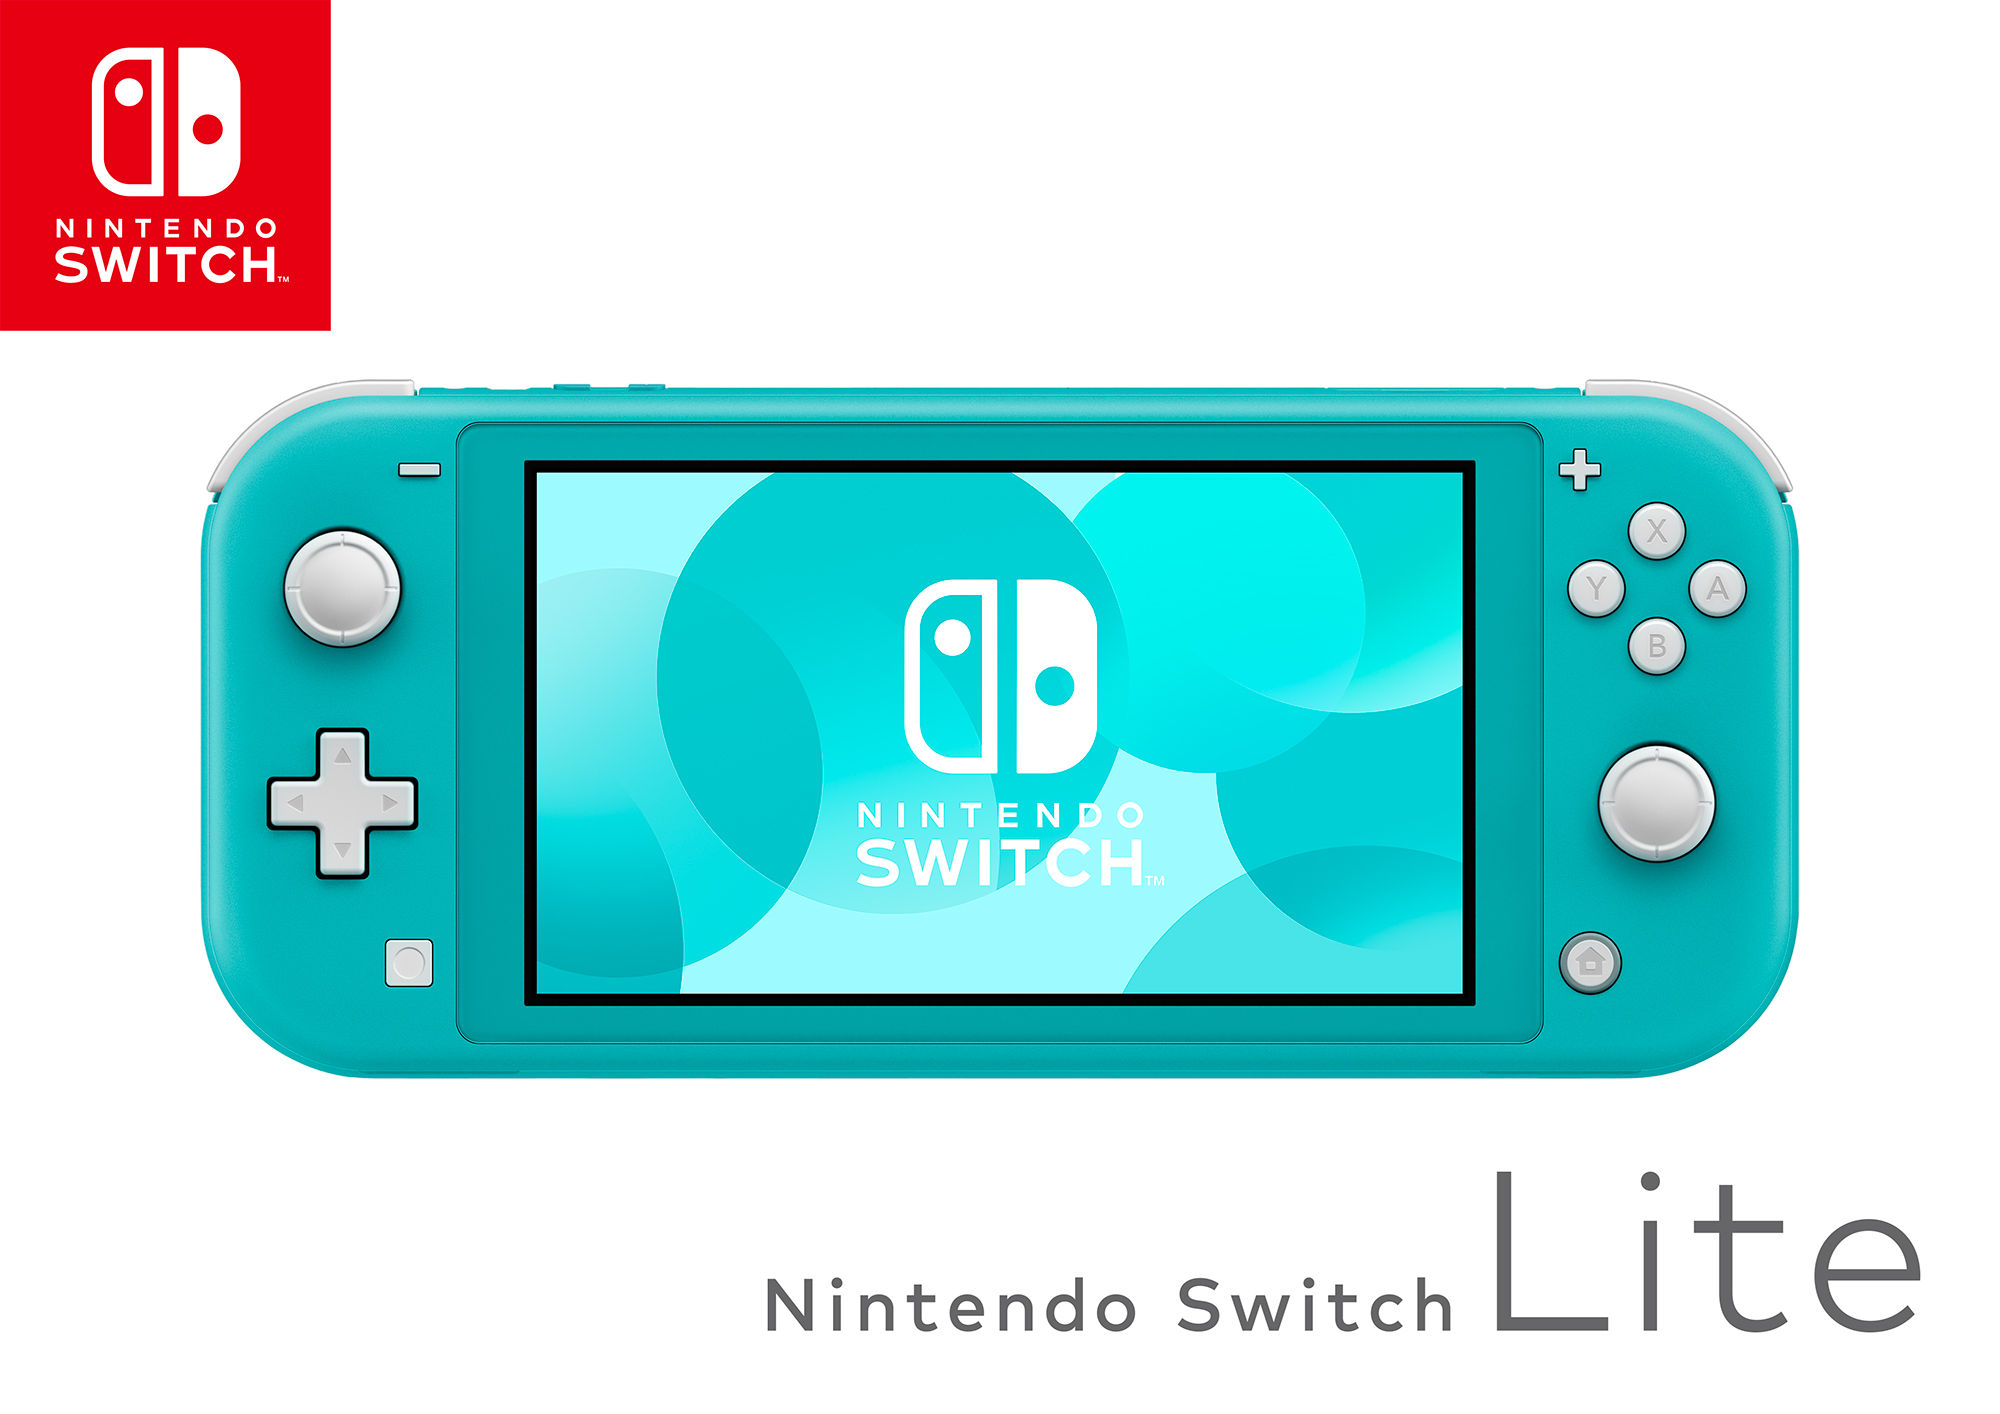 Nintendo Switch Lite Console, Turquoise - image 2 of 2